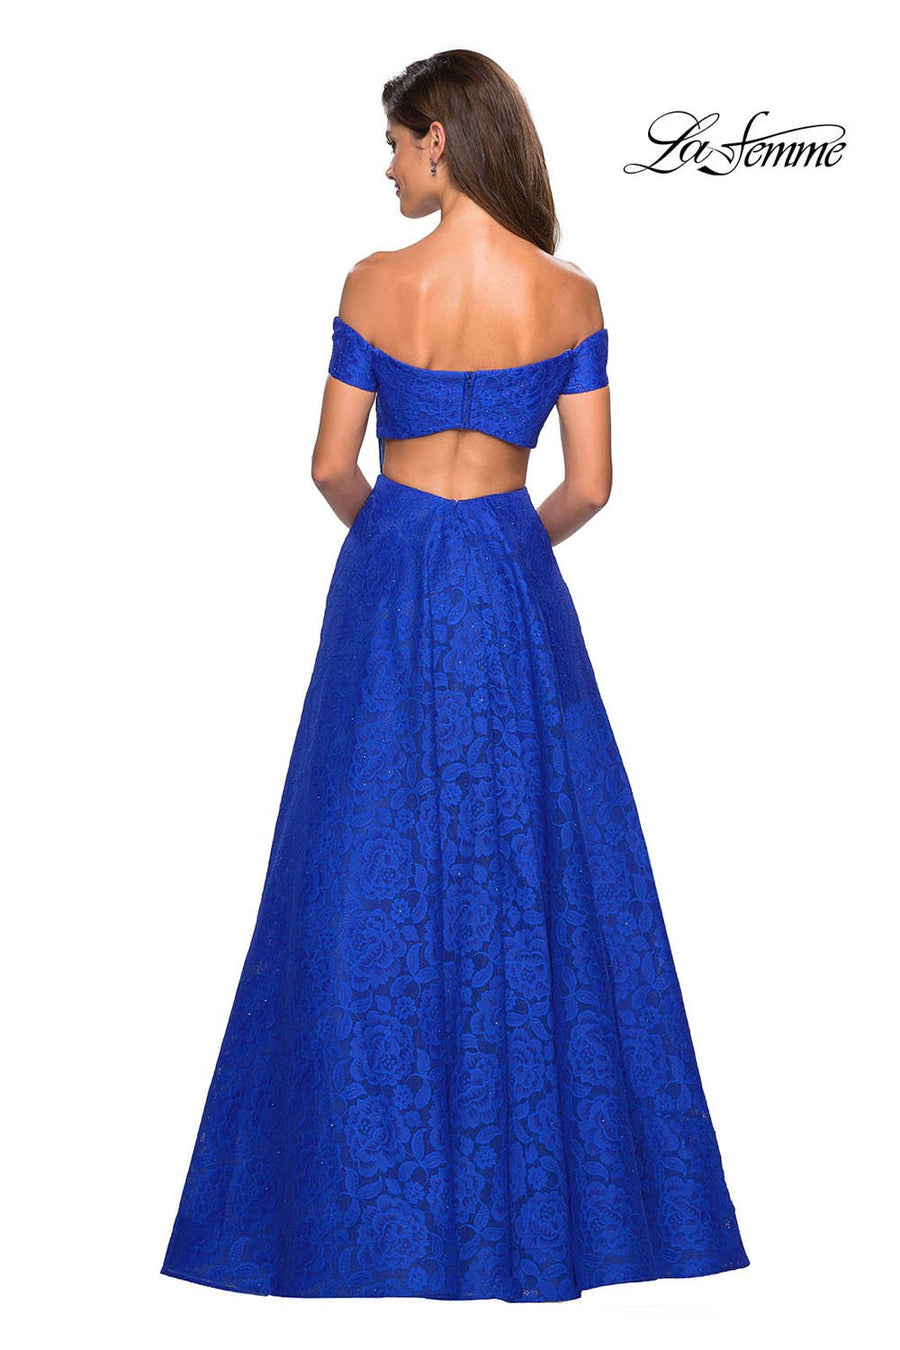 La Femme 27556 prom dress images.  La Femme 27556 is available in these colors: Electric Blue, Garnet, Hot Pink, White.